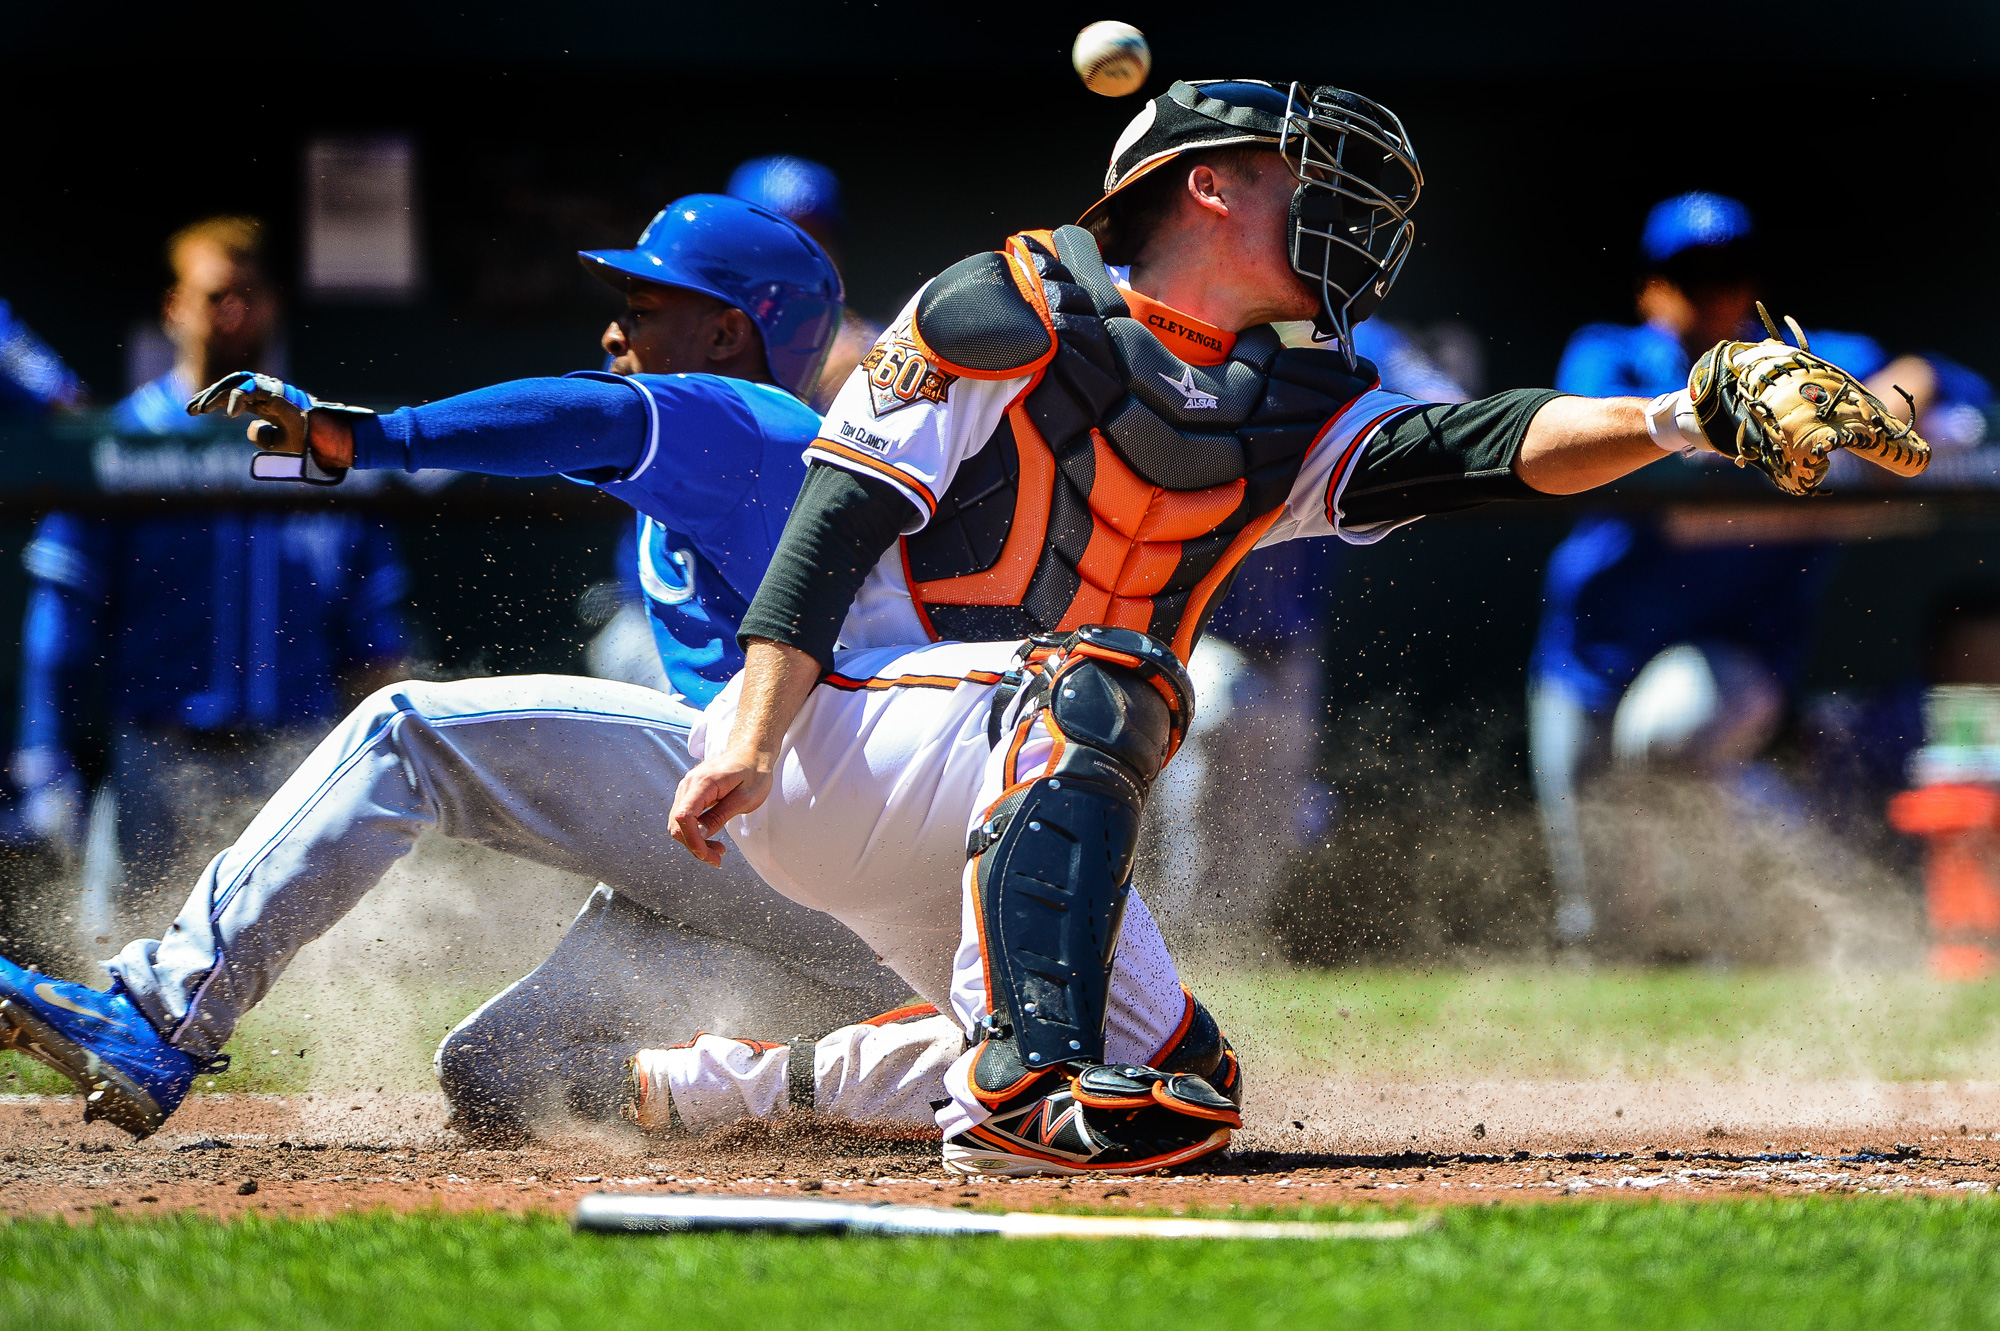  Baltimore Orioles catcher Steve Clevenger misses the play at home while Jarrod Dyson of the Kansas City Royals scores at Oriole Park in Camden Yards in Baltimore, Md. on April 27, 2014. 